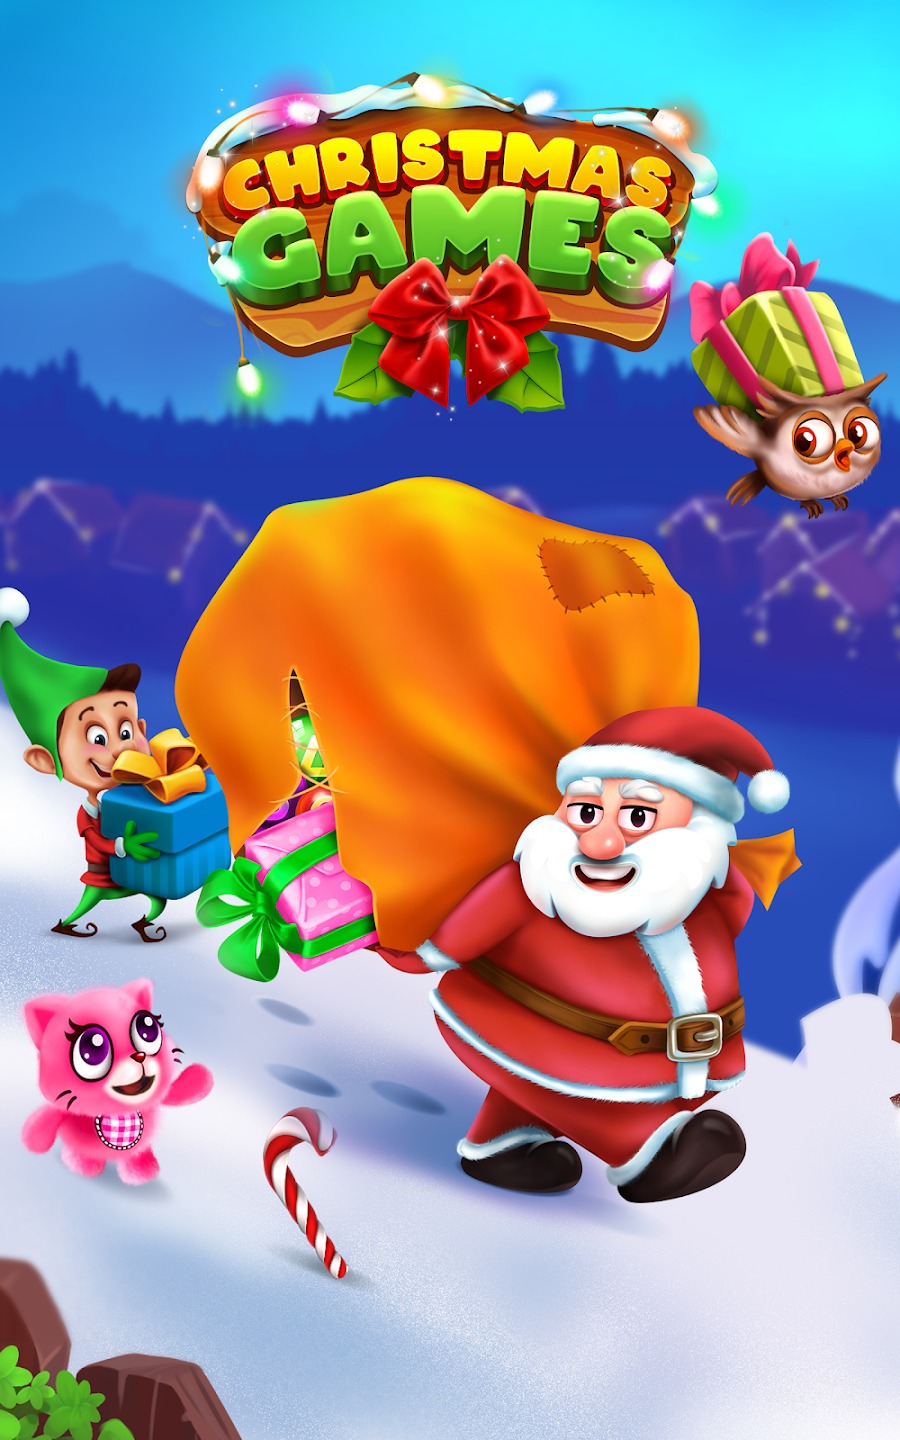 Top 10 Christmas Games For Android BlueStacks